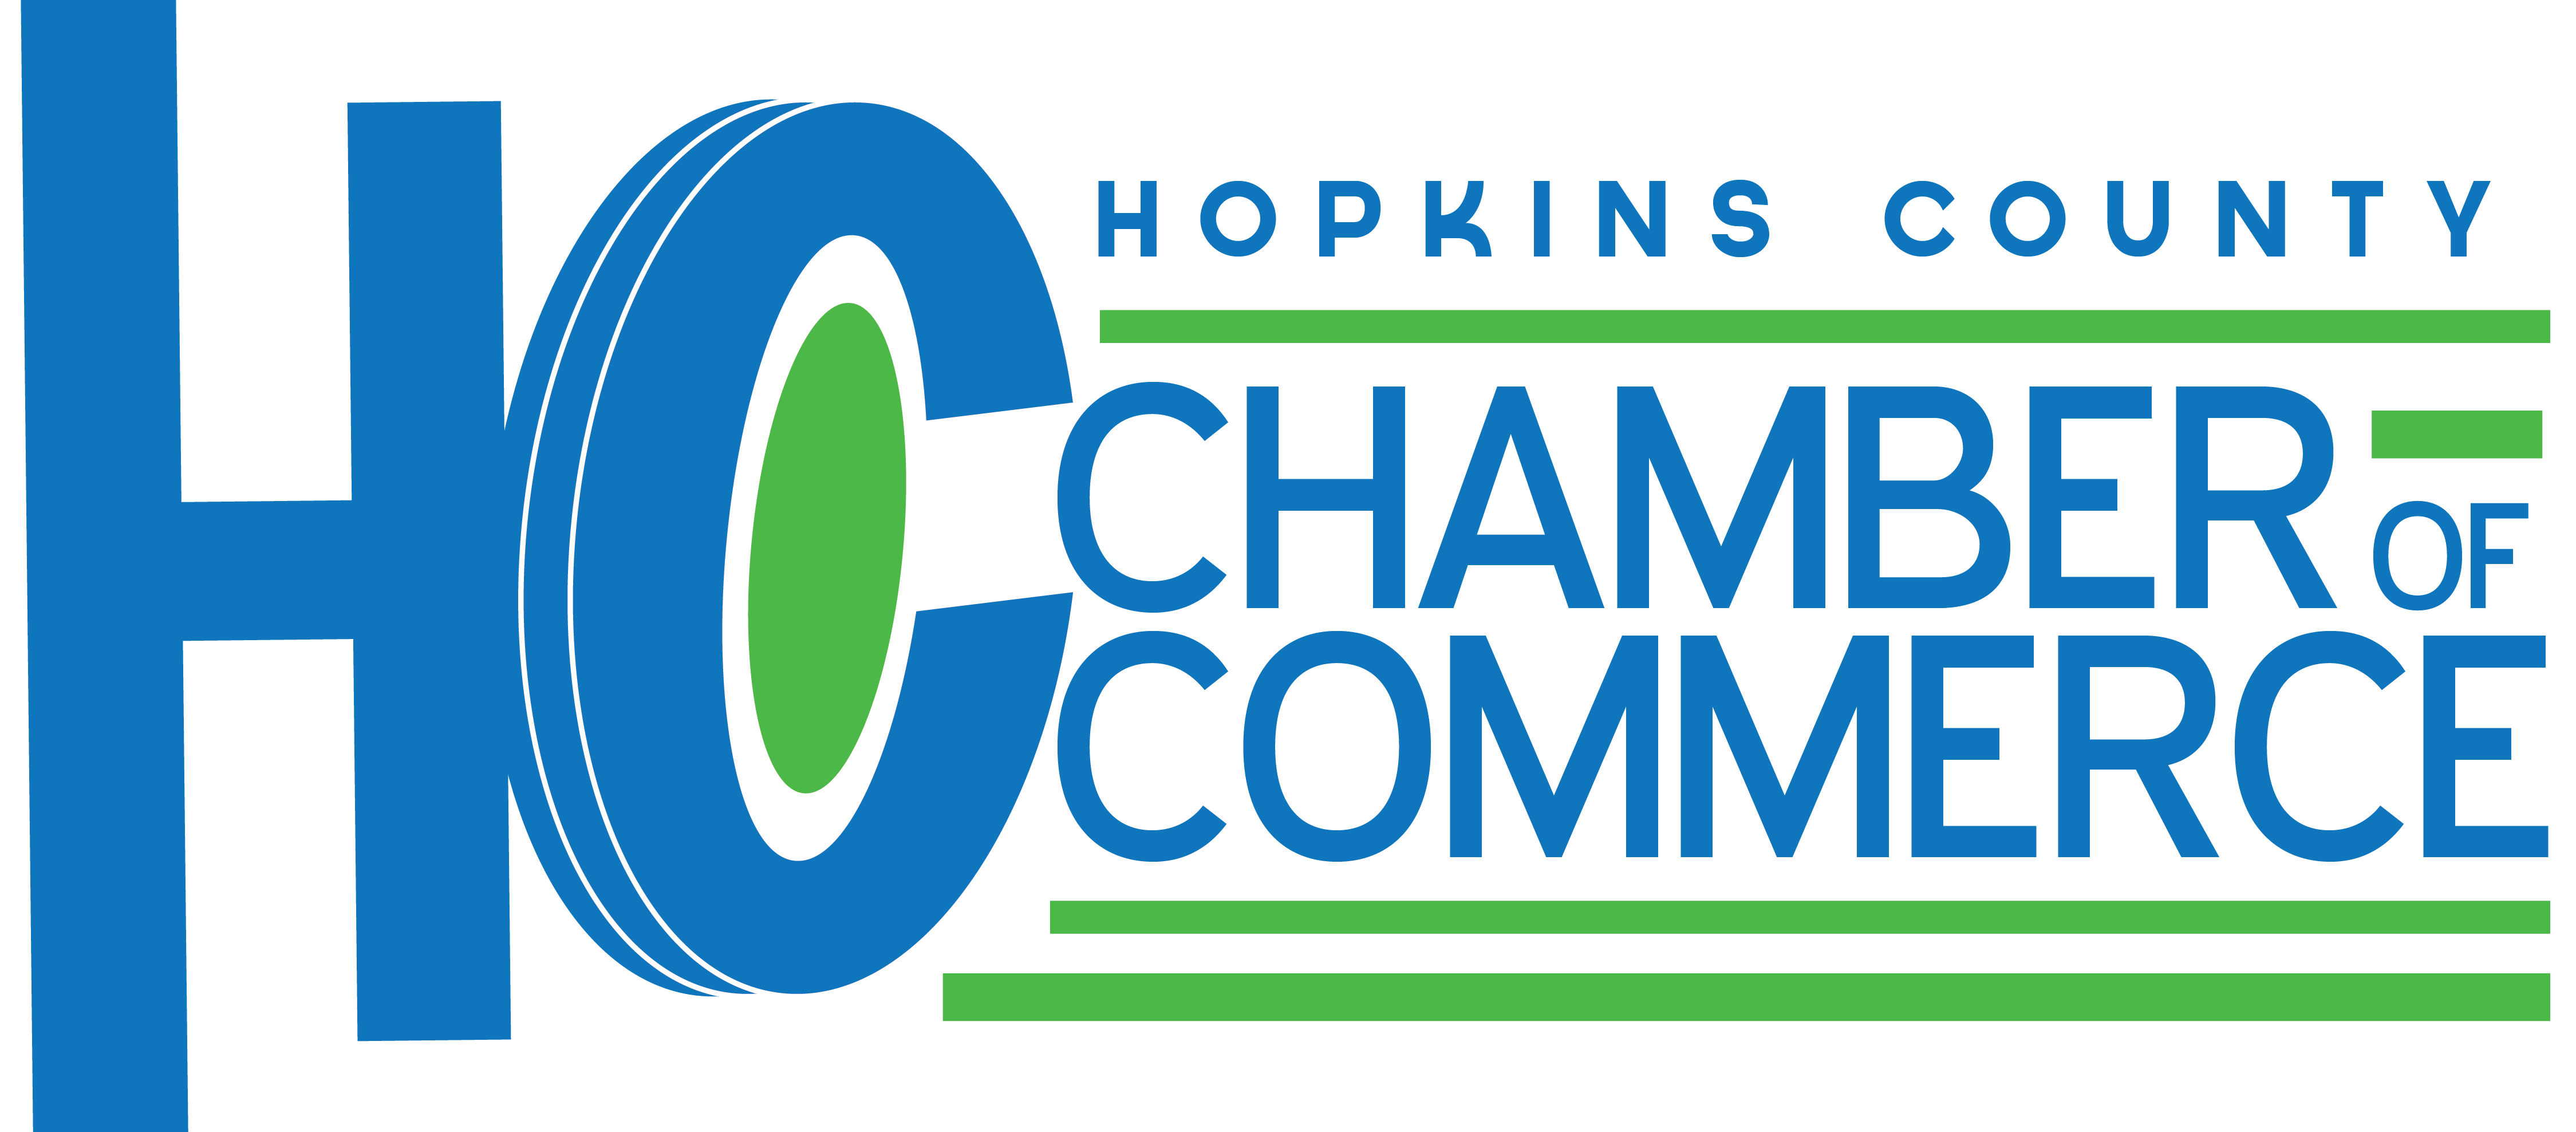 Hopkins County Chamber of Commerce